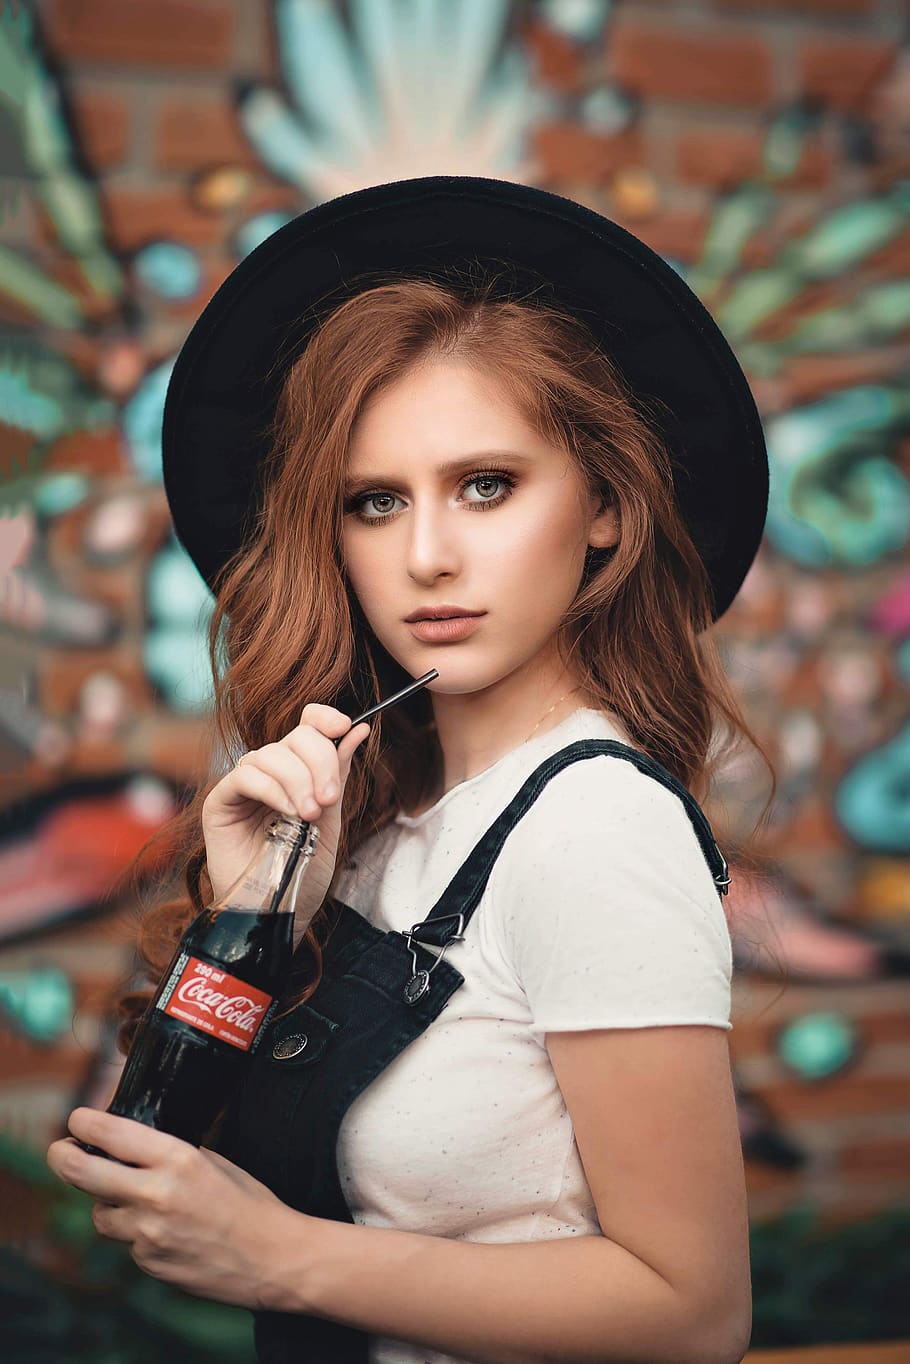 Woman in Black Hat and White Shirt Holding Coca-cola Bottle, adolescent